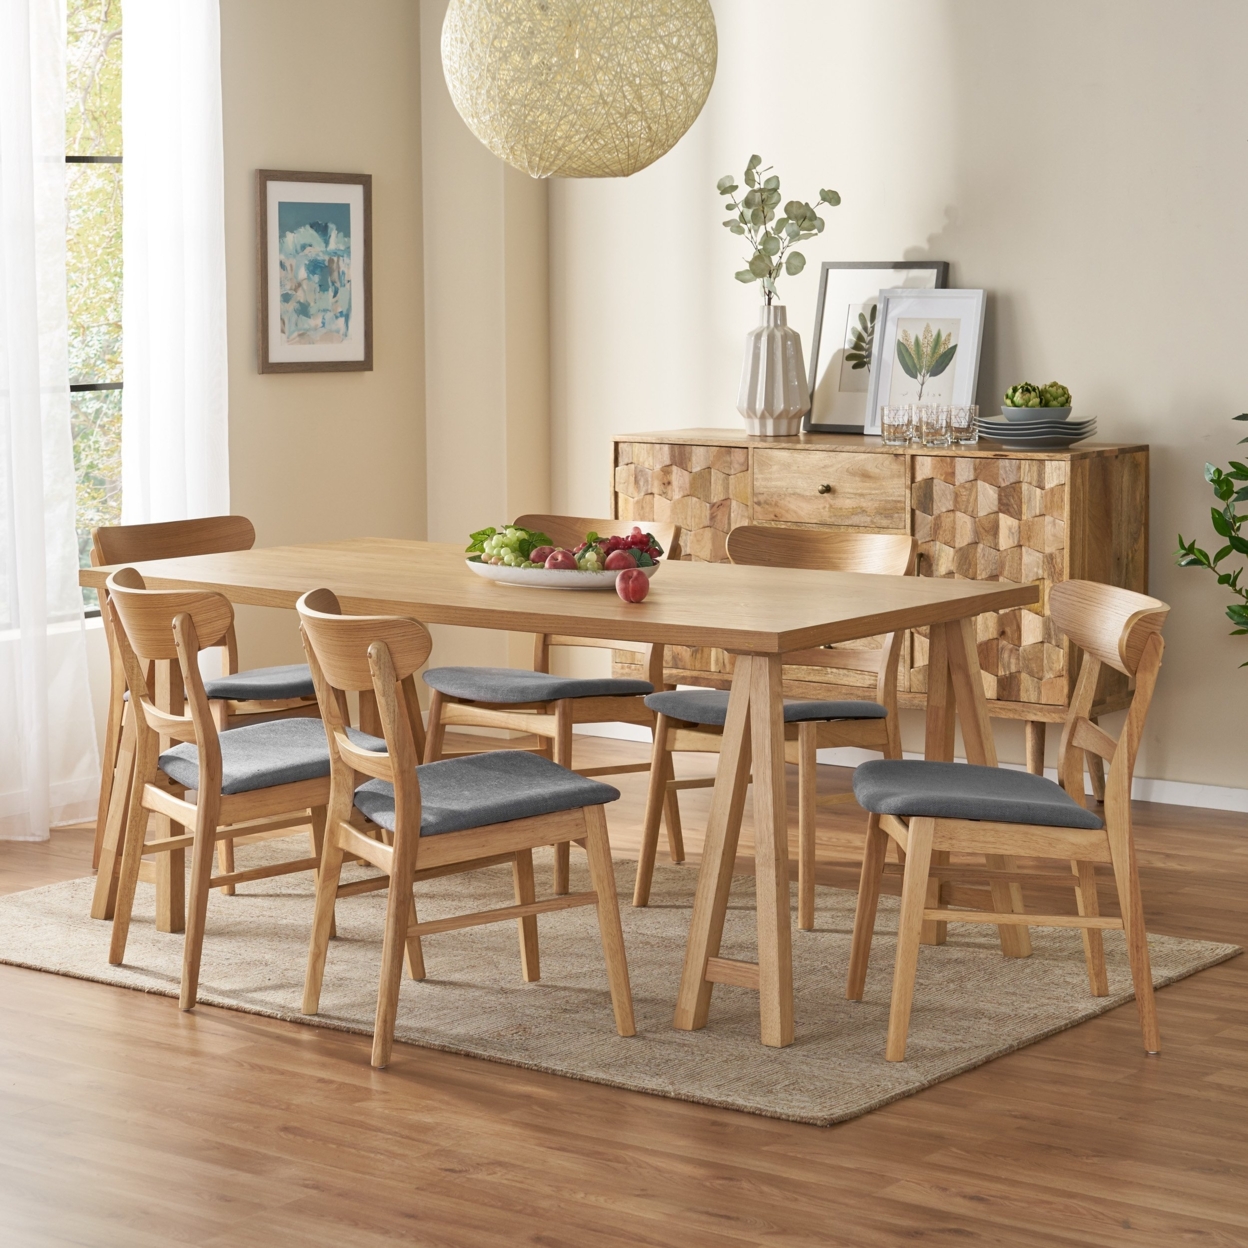 Randal Mid-Century Modern 7 Piece Dining Set With A-Frame Table - Walnut/mint